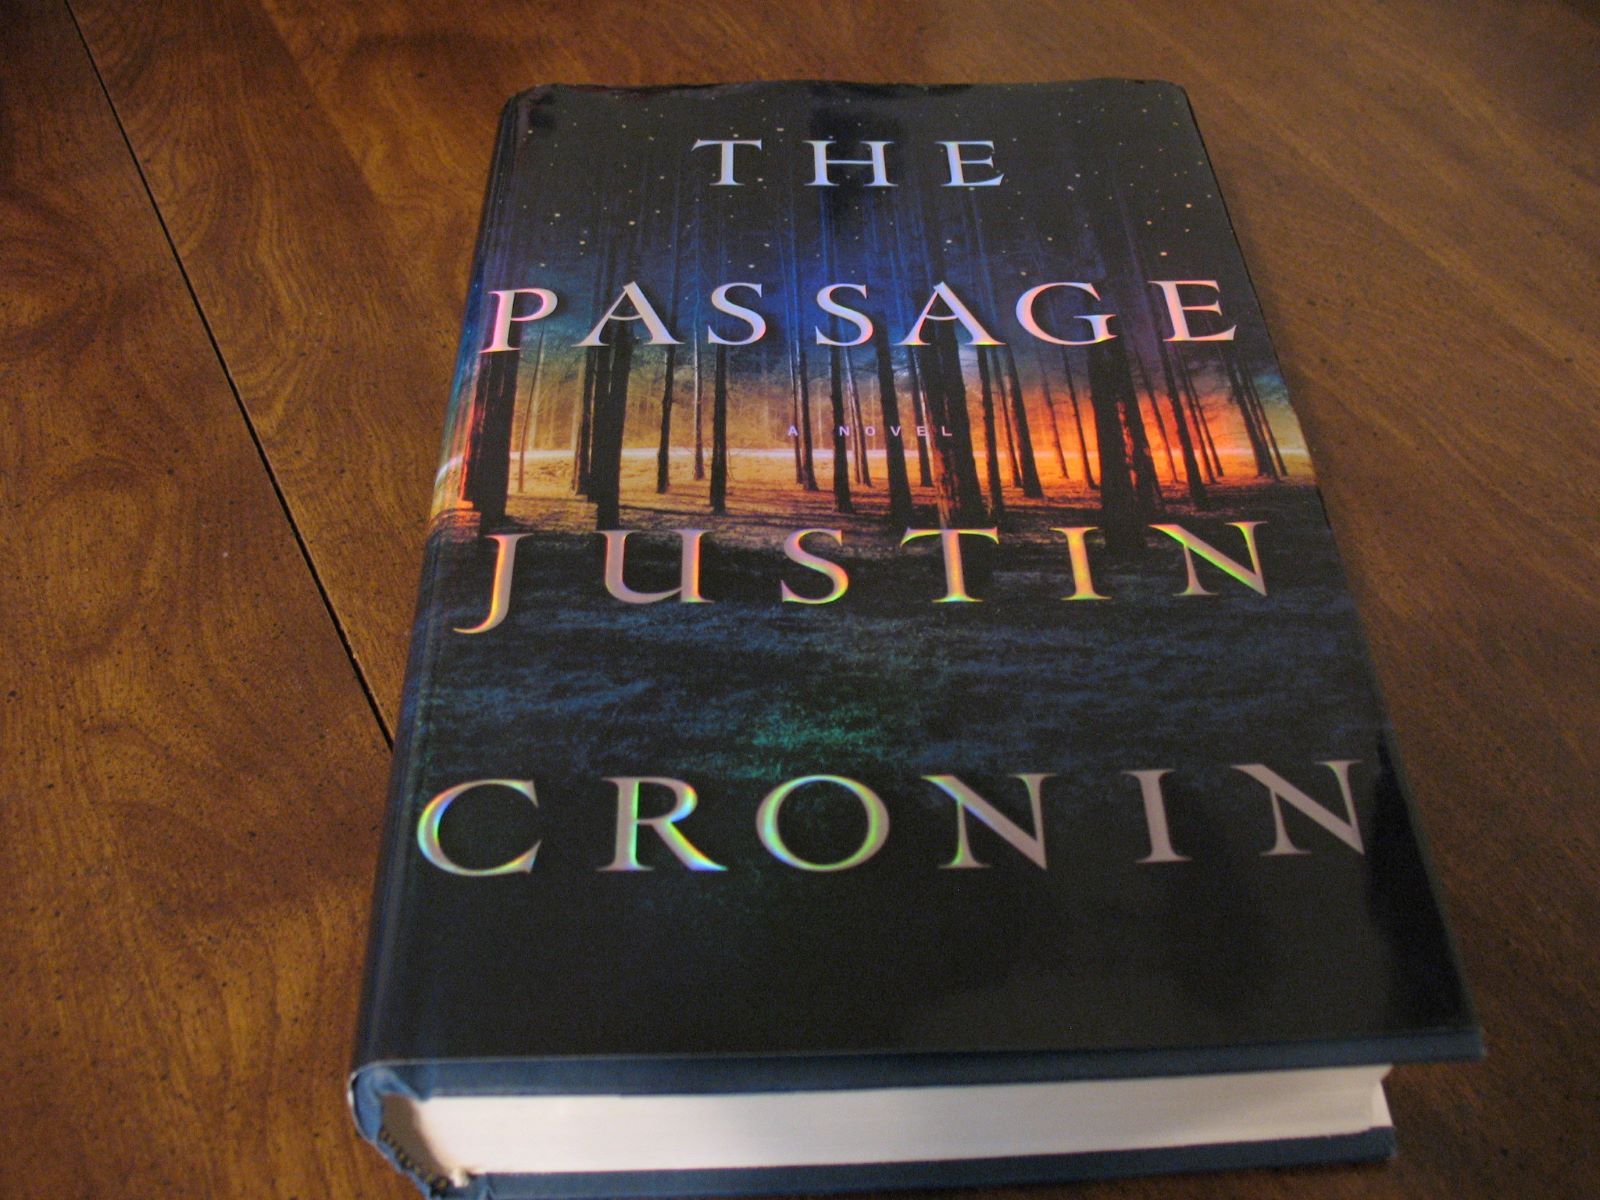 20-extraordinary-facts-about-the-passage-justin-cronin